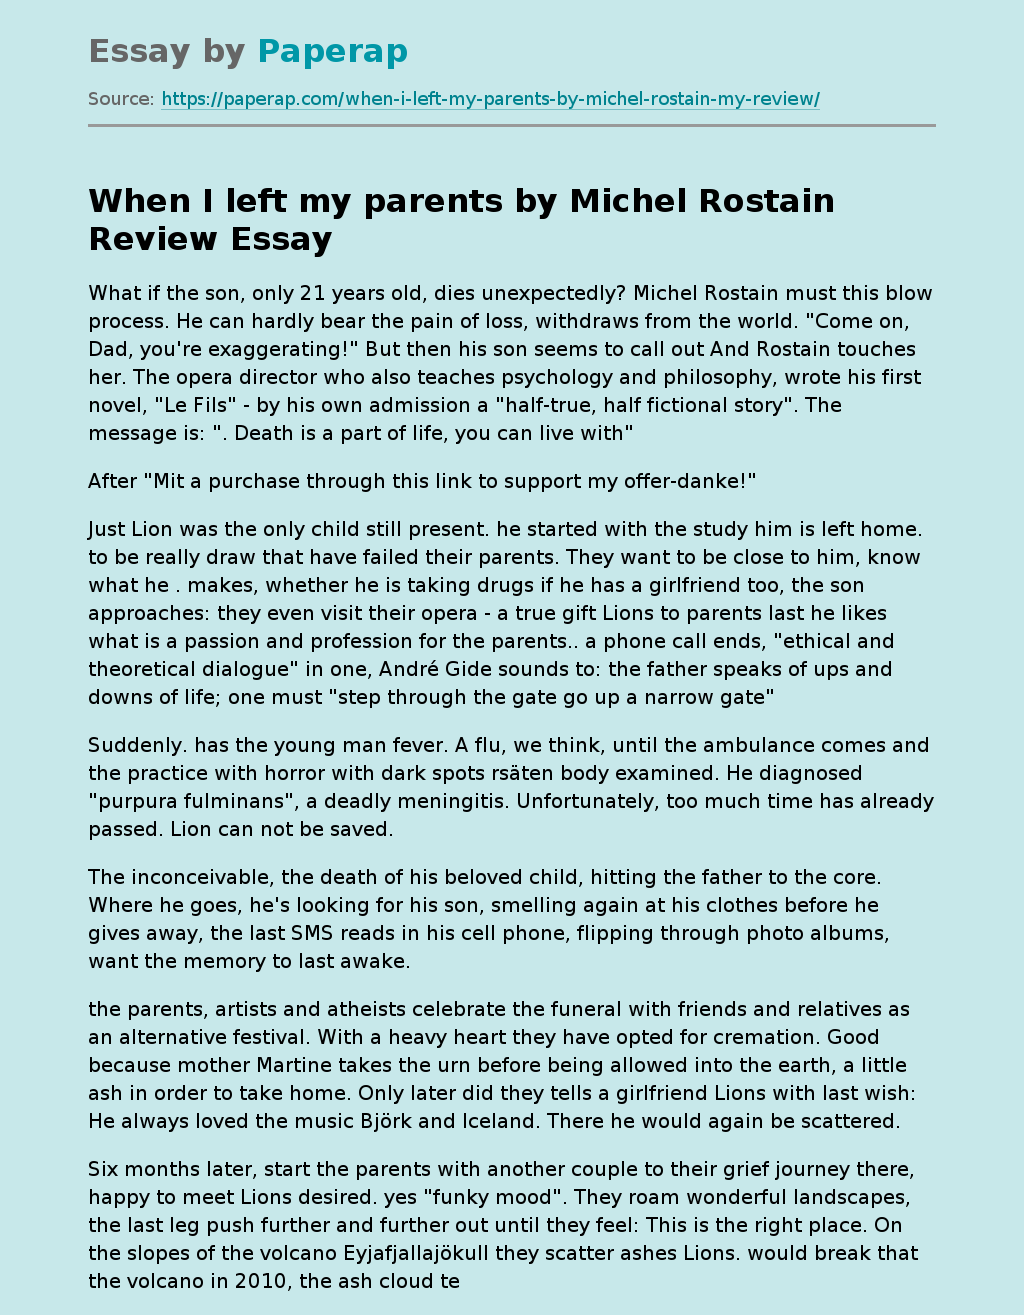 When I left my parents by Michel Rostain Review